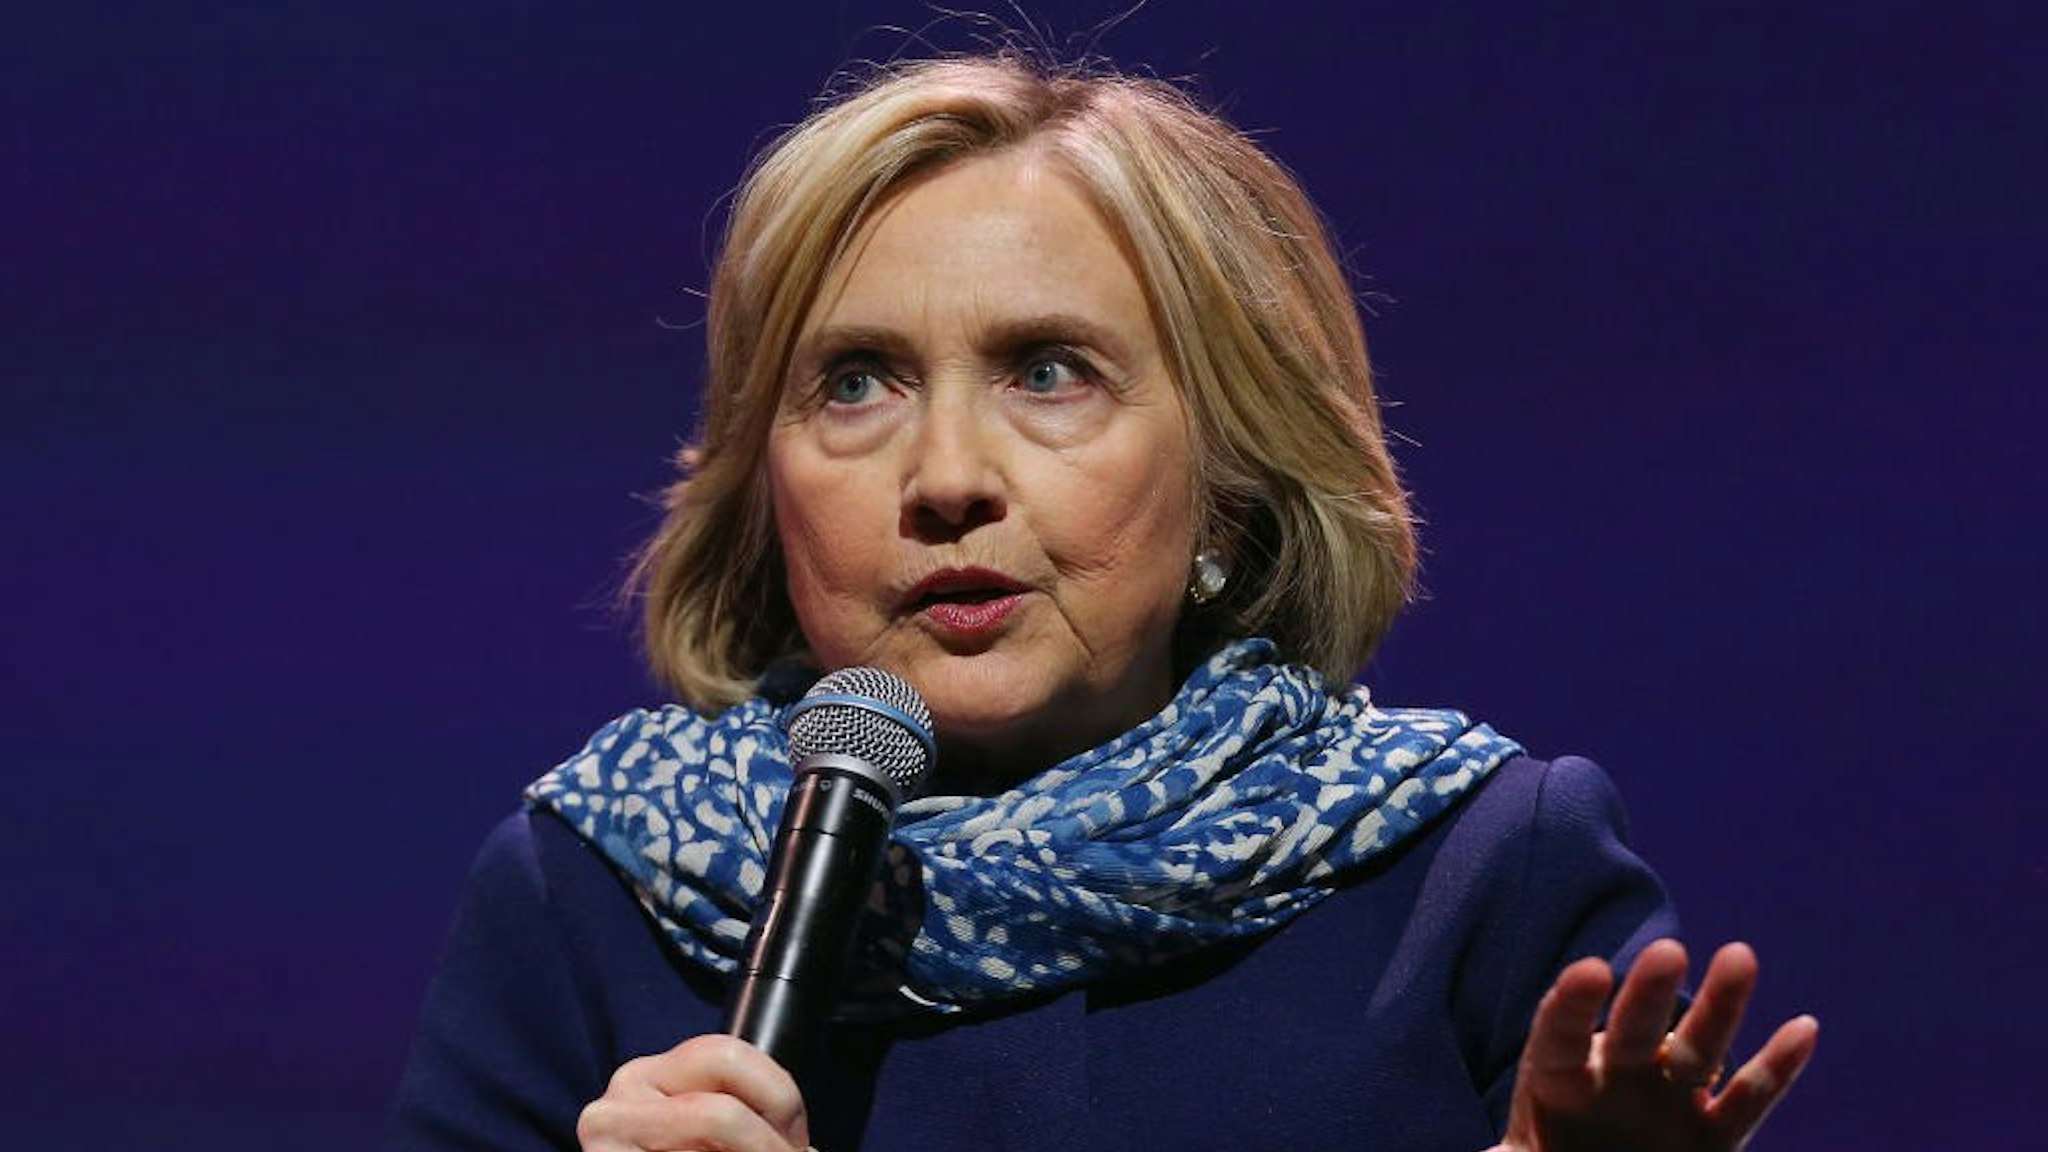 Hillary Clinton speaks during An Evening With Hillary Rodham Clinton at ICC Sydney on May 11, 2018 in Sydney, Australia.